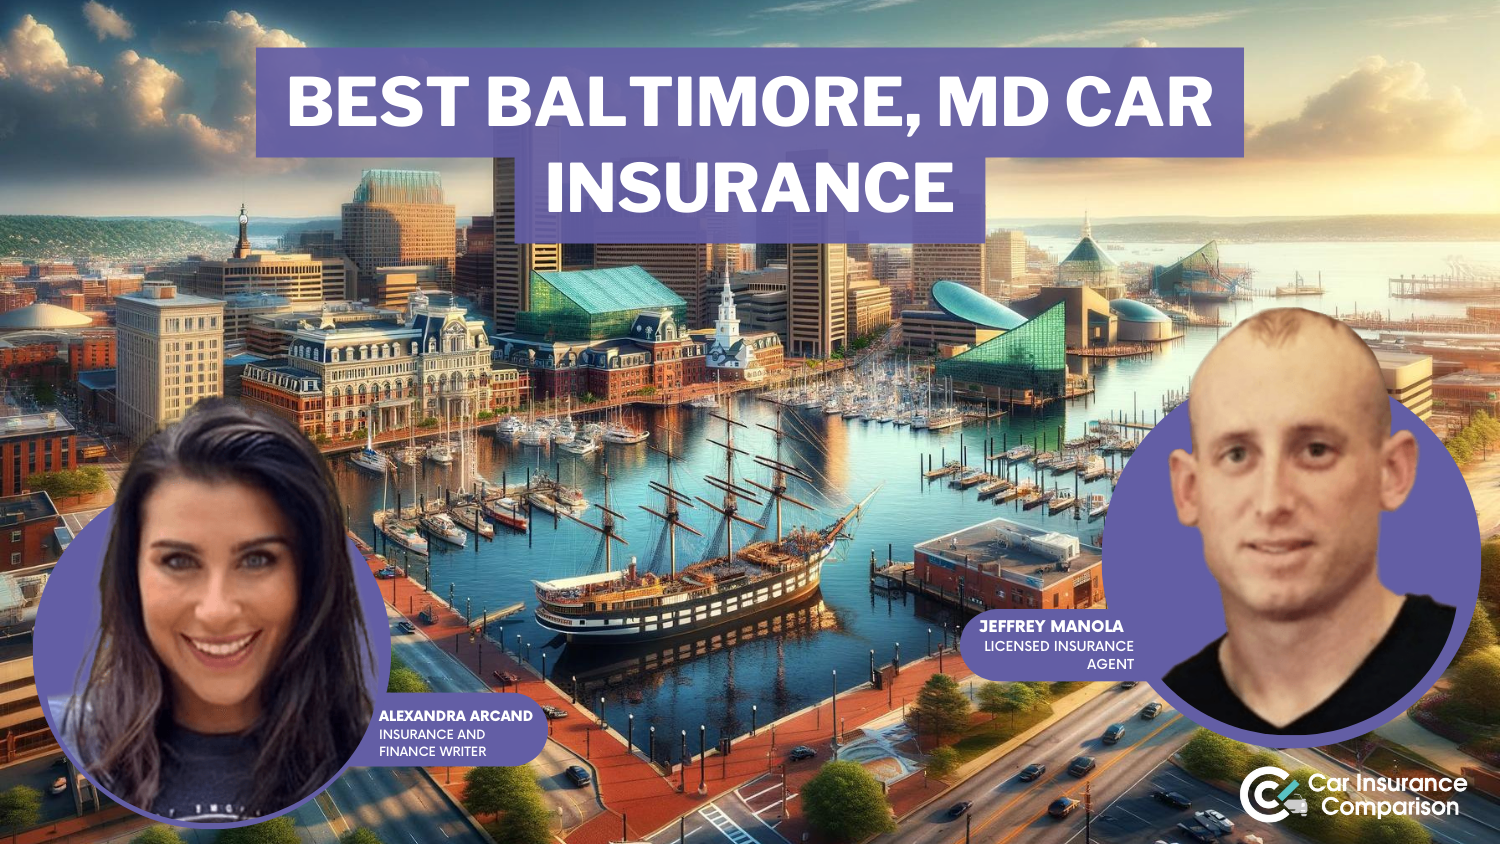 Best Baltimore, MD Car Insurance: State Farm, Geico, and Progressive